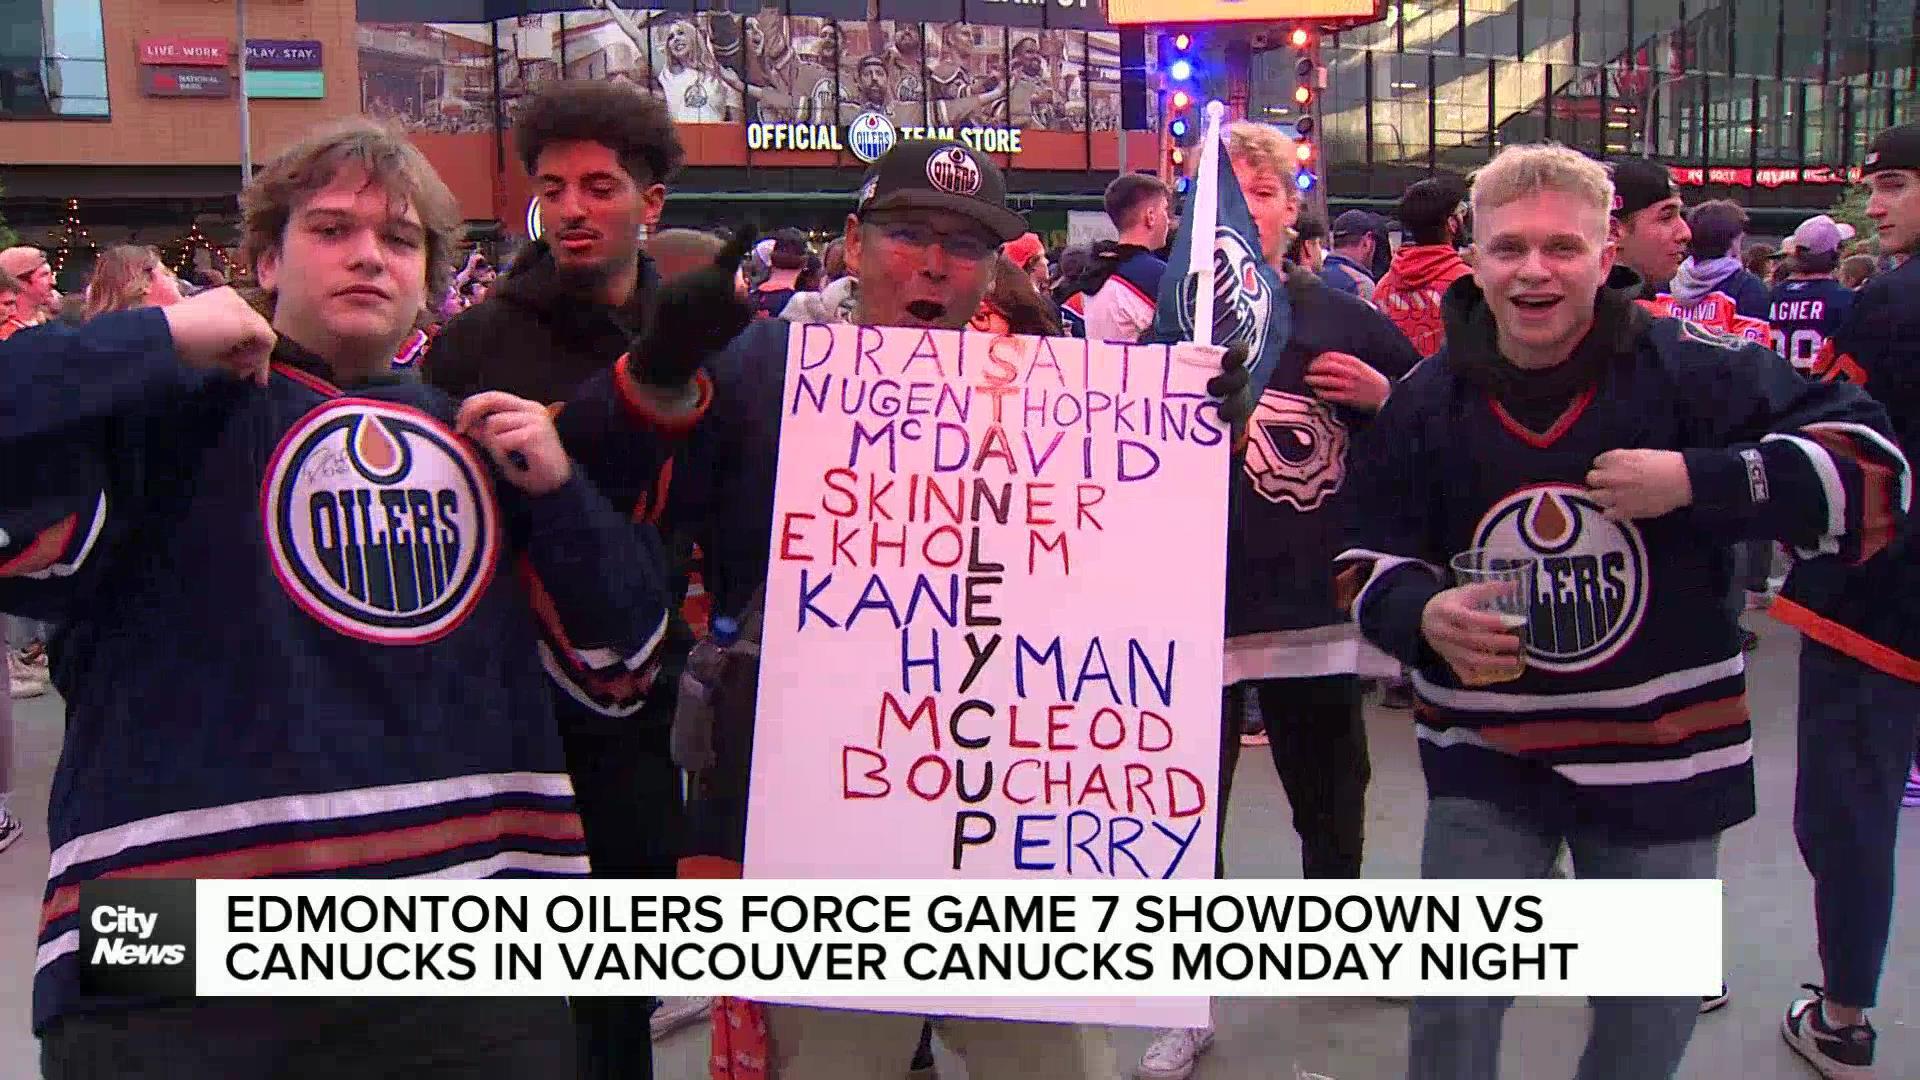 Fans reacts after Edmonton Oilers force Game 7 vs Vancouver Canucks